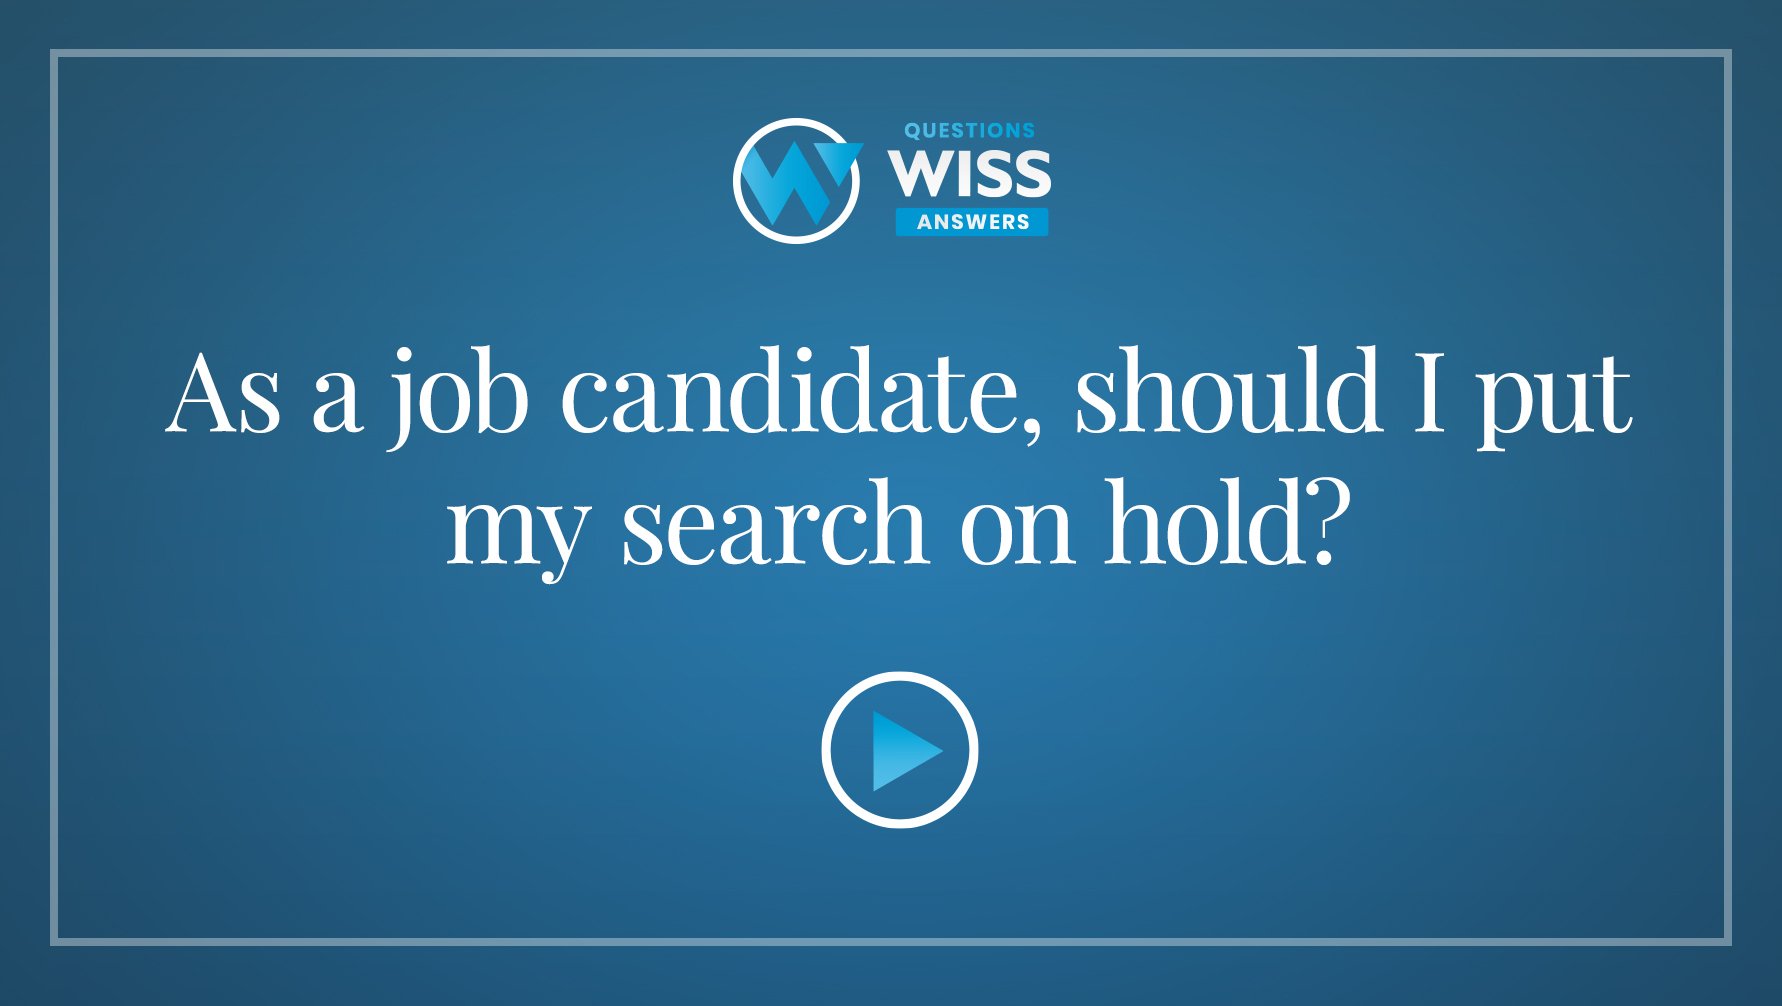 As a job candidate, should I put my search on hold?